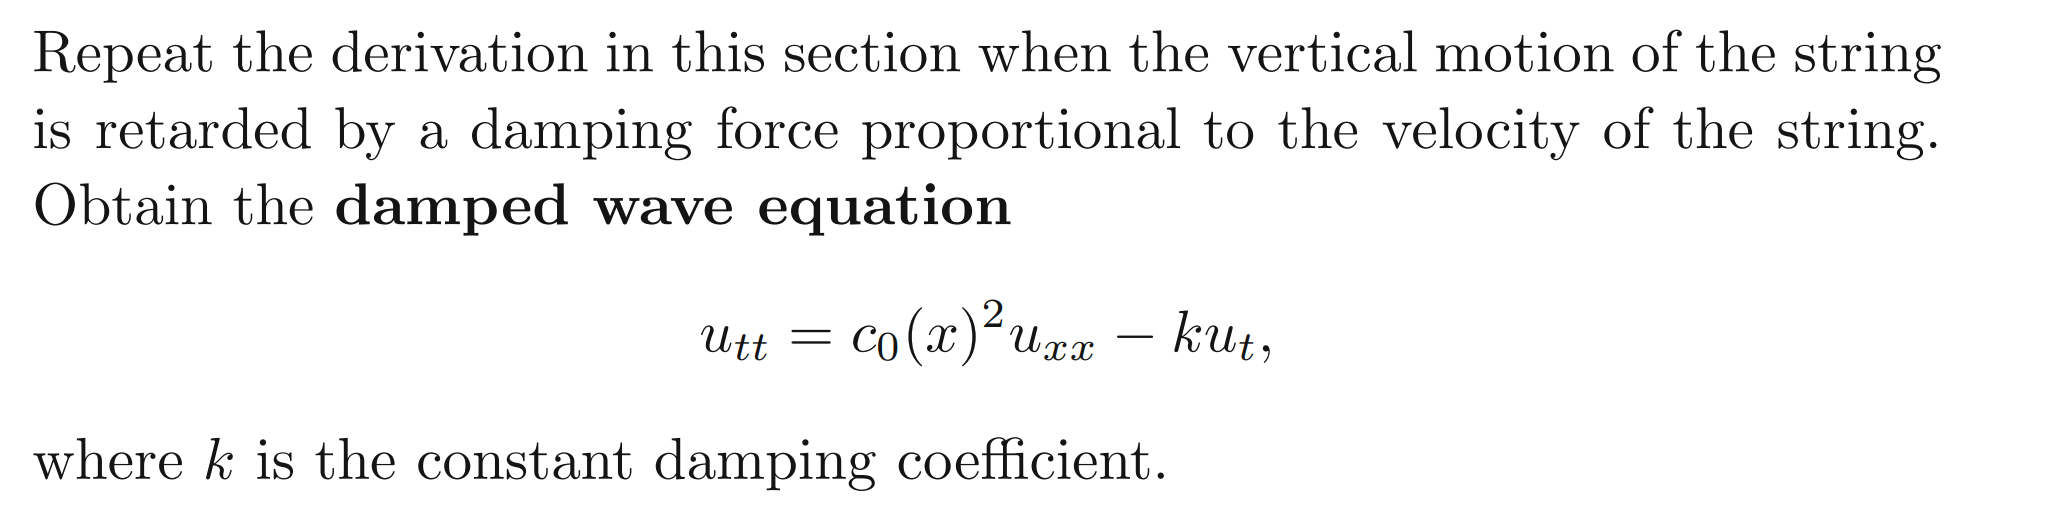 Repeat the derivation in this section when the vertical motion of the string
is retarded by a damping force proportional to the velocity of the string.
Obtain the damped wave equation
Utt = co(x)²upx kuz,
2
kut,
-
where k is the constant damping coefficient.
